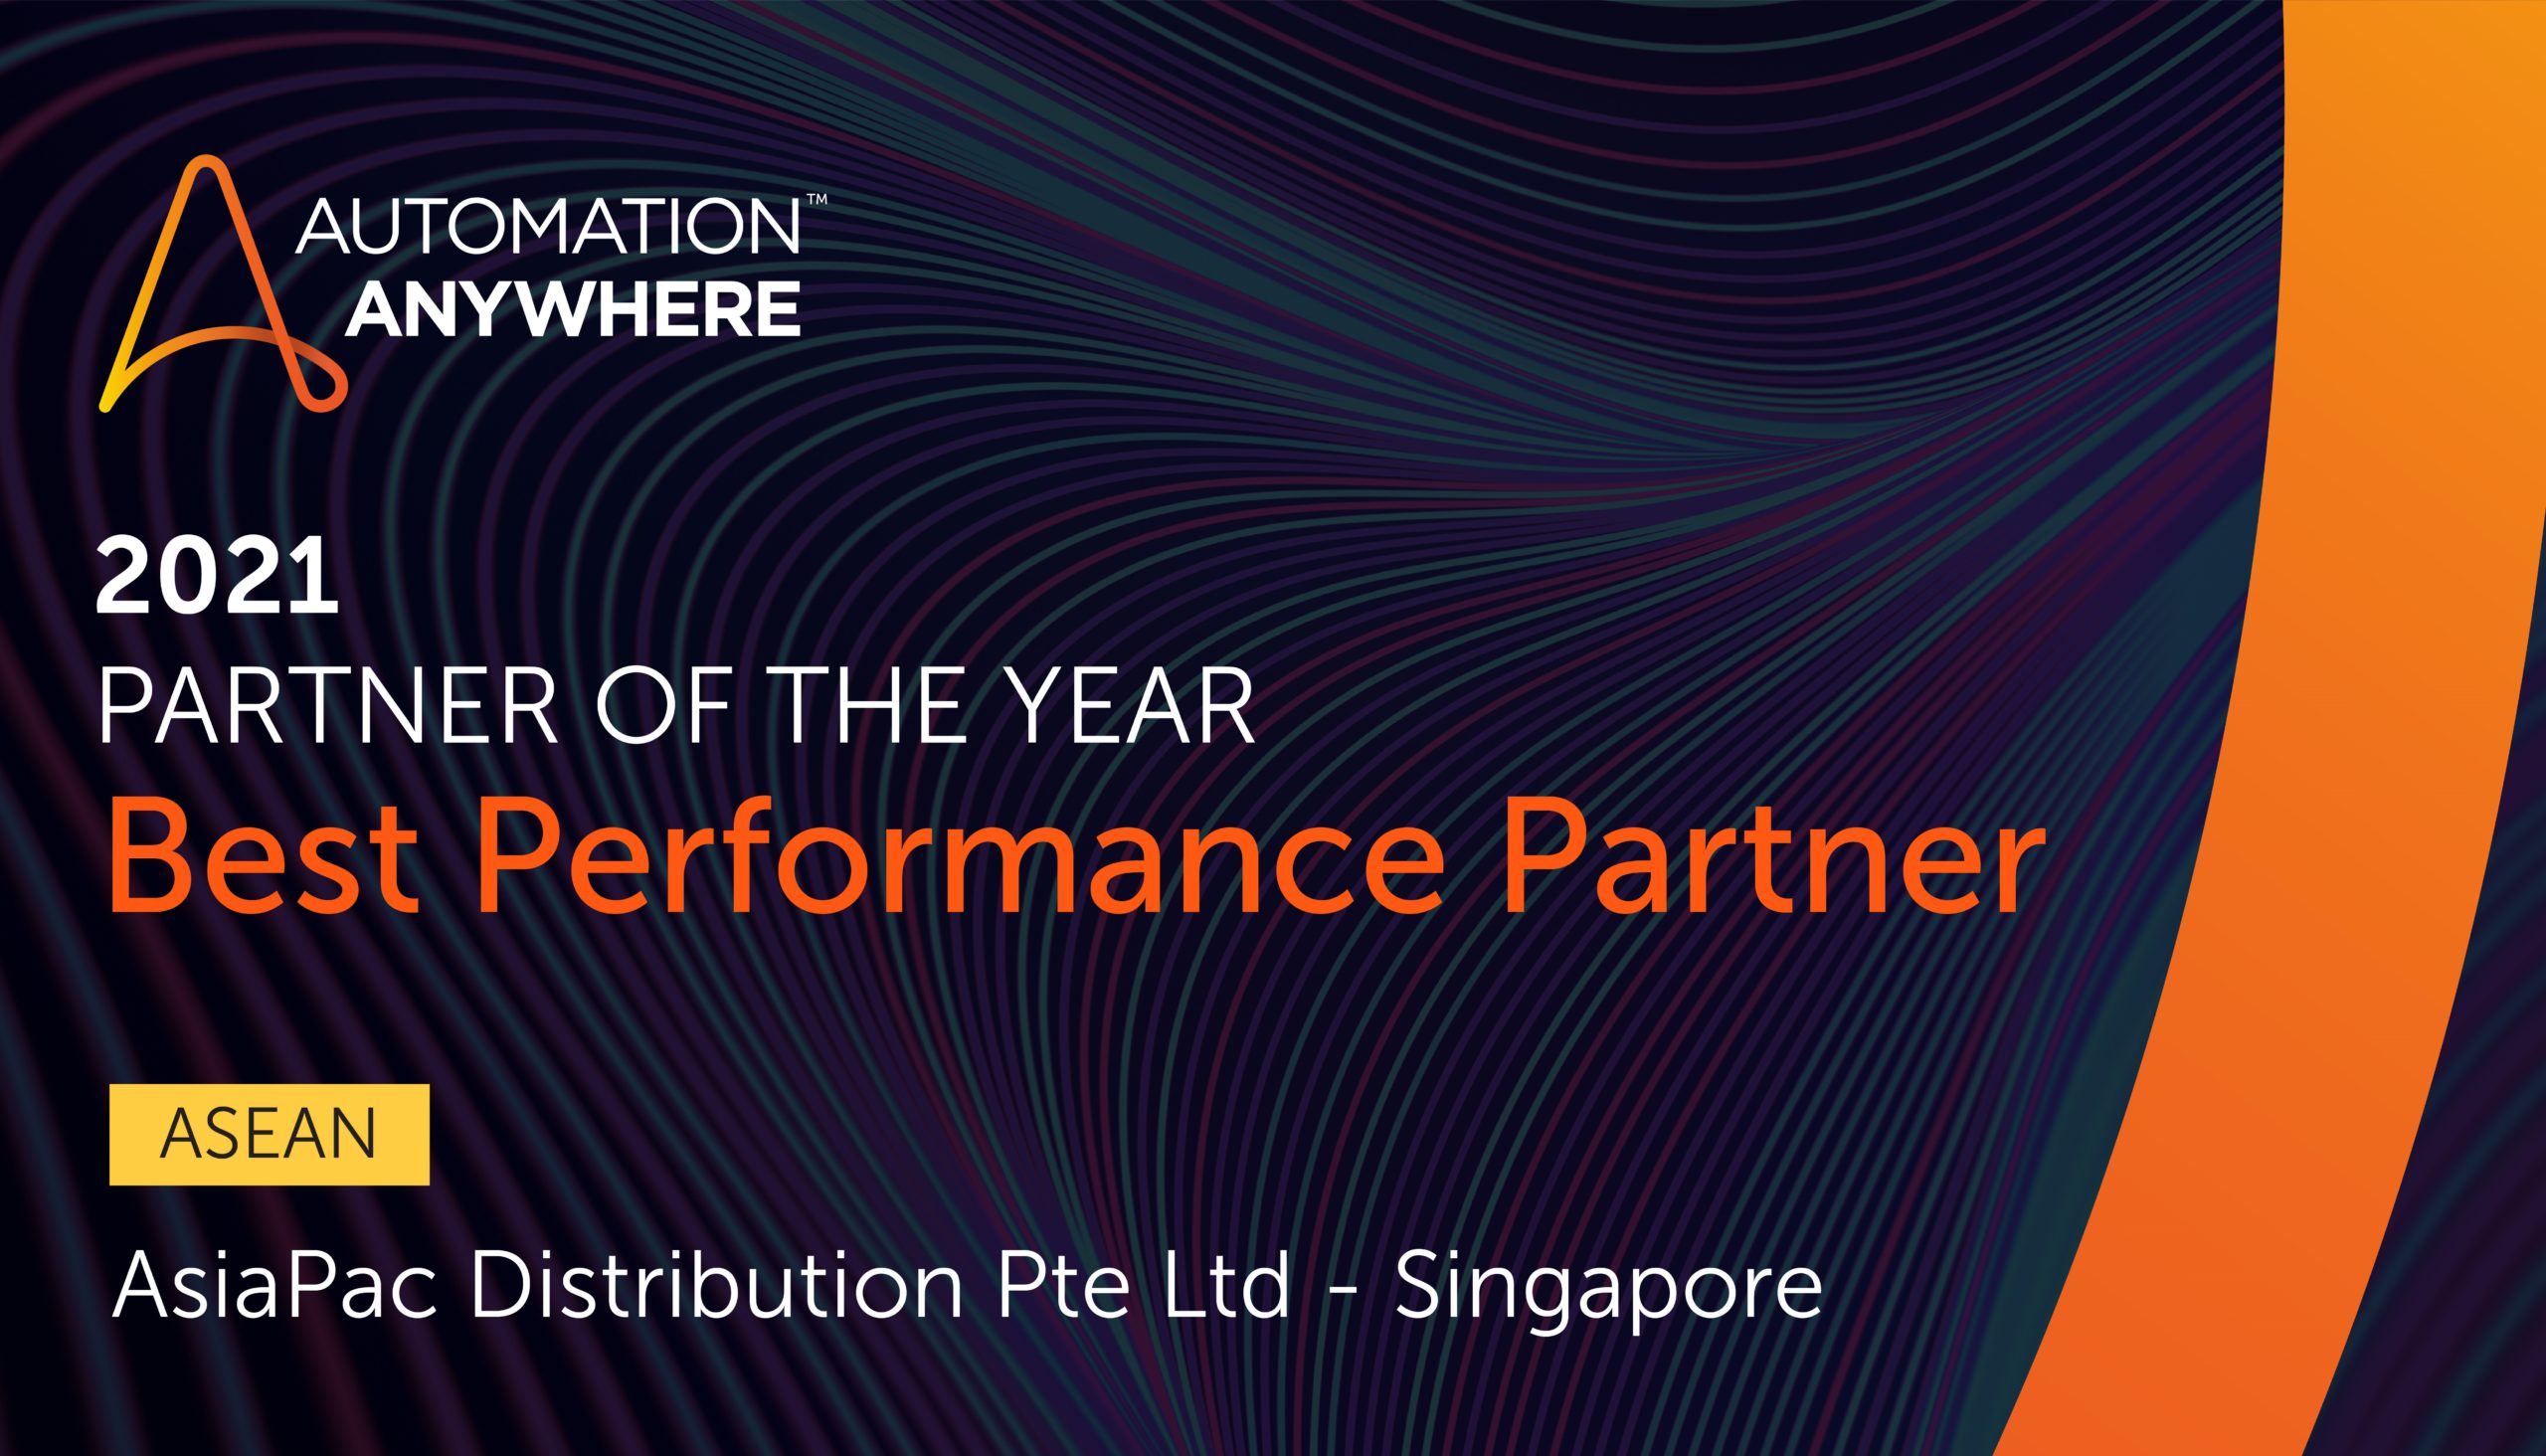 Automation Anywhere Best Performance Partner of the Year 2021